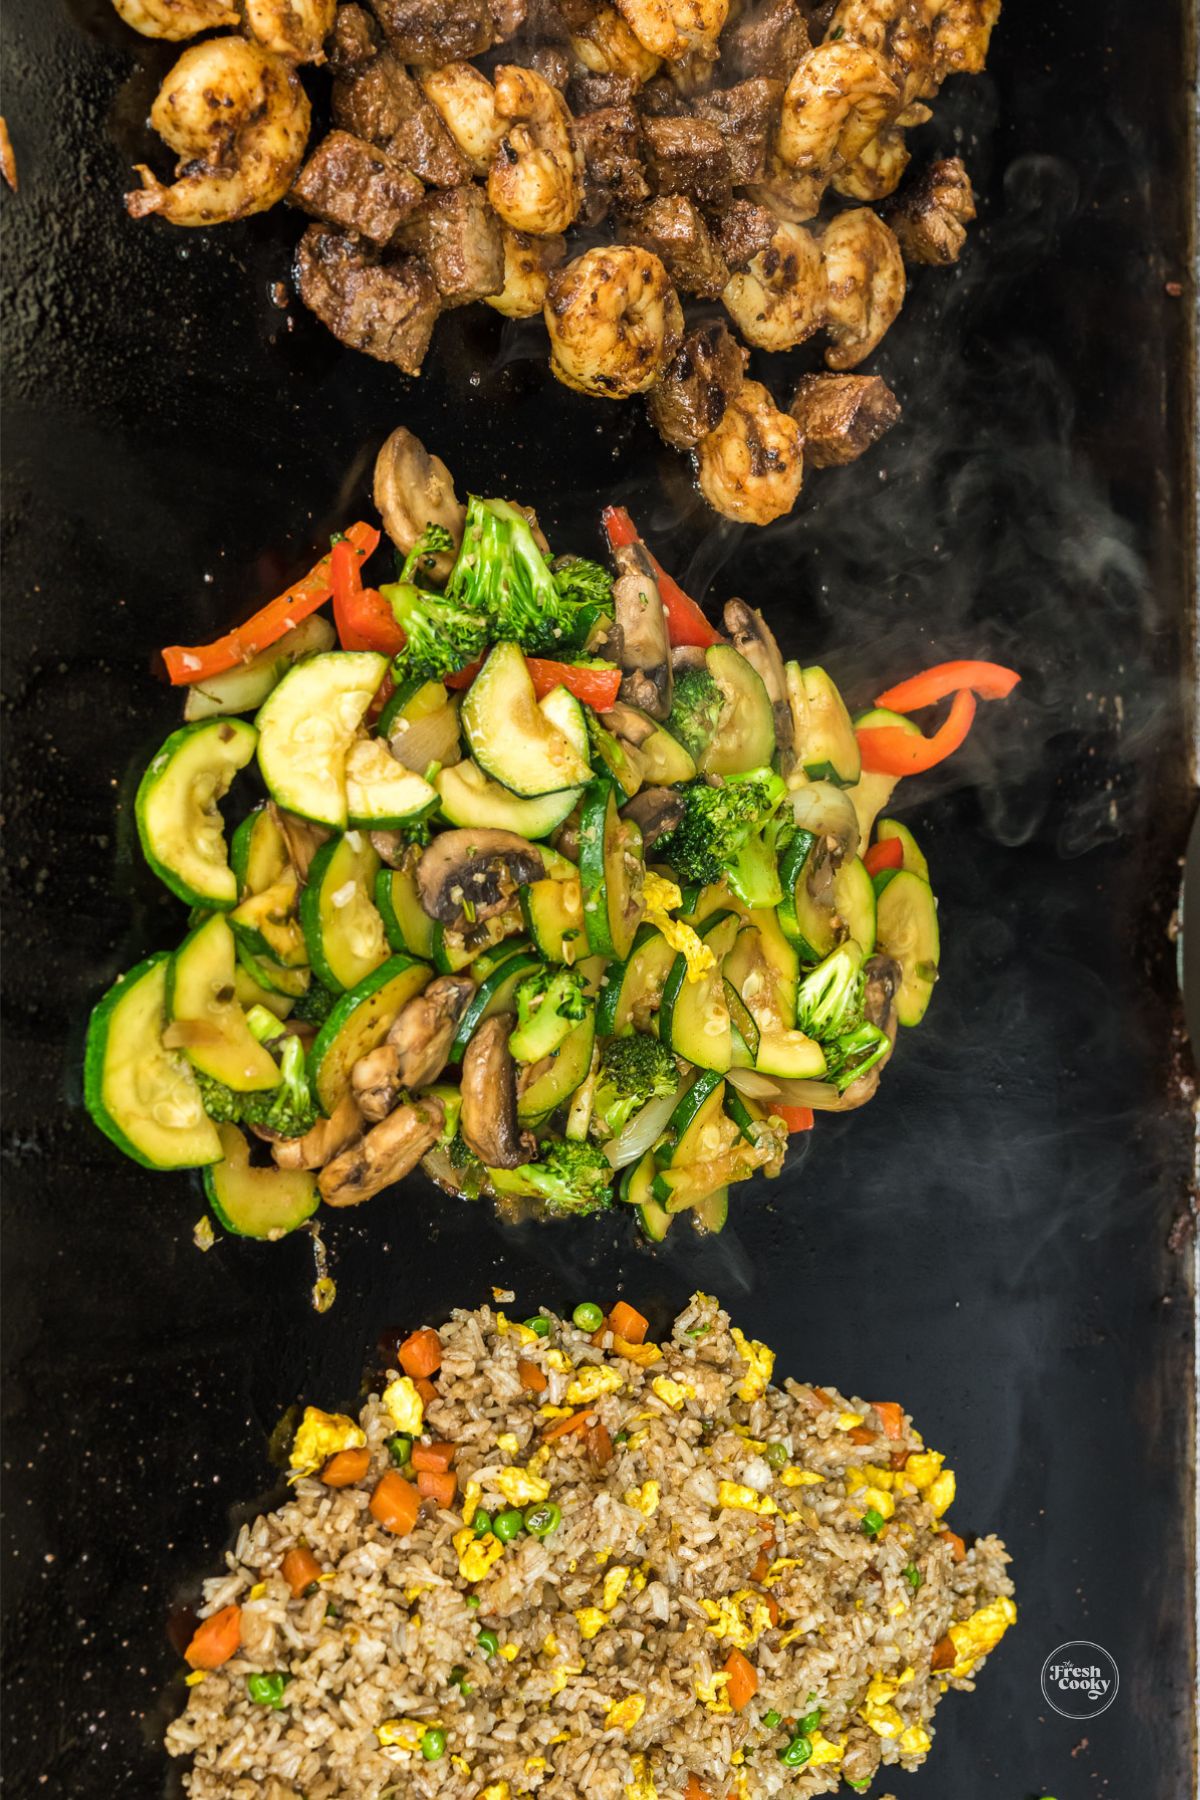 Hibachi steak and shrimp, with vegetables and fried rice on Blackstone griddle.